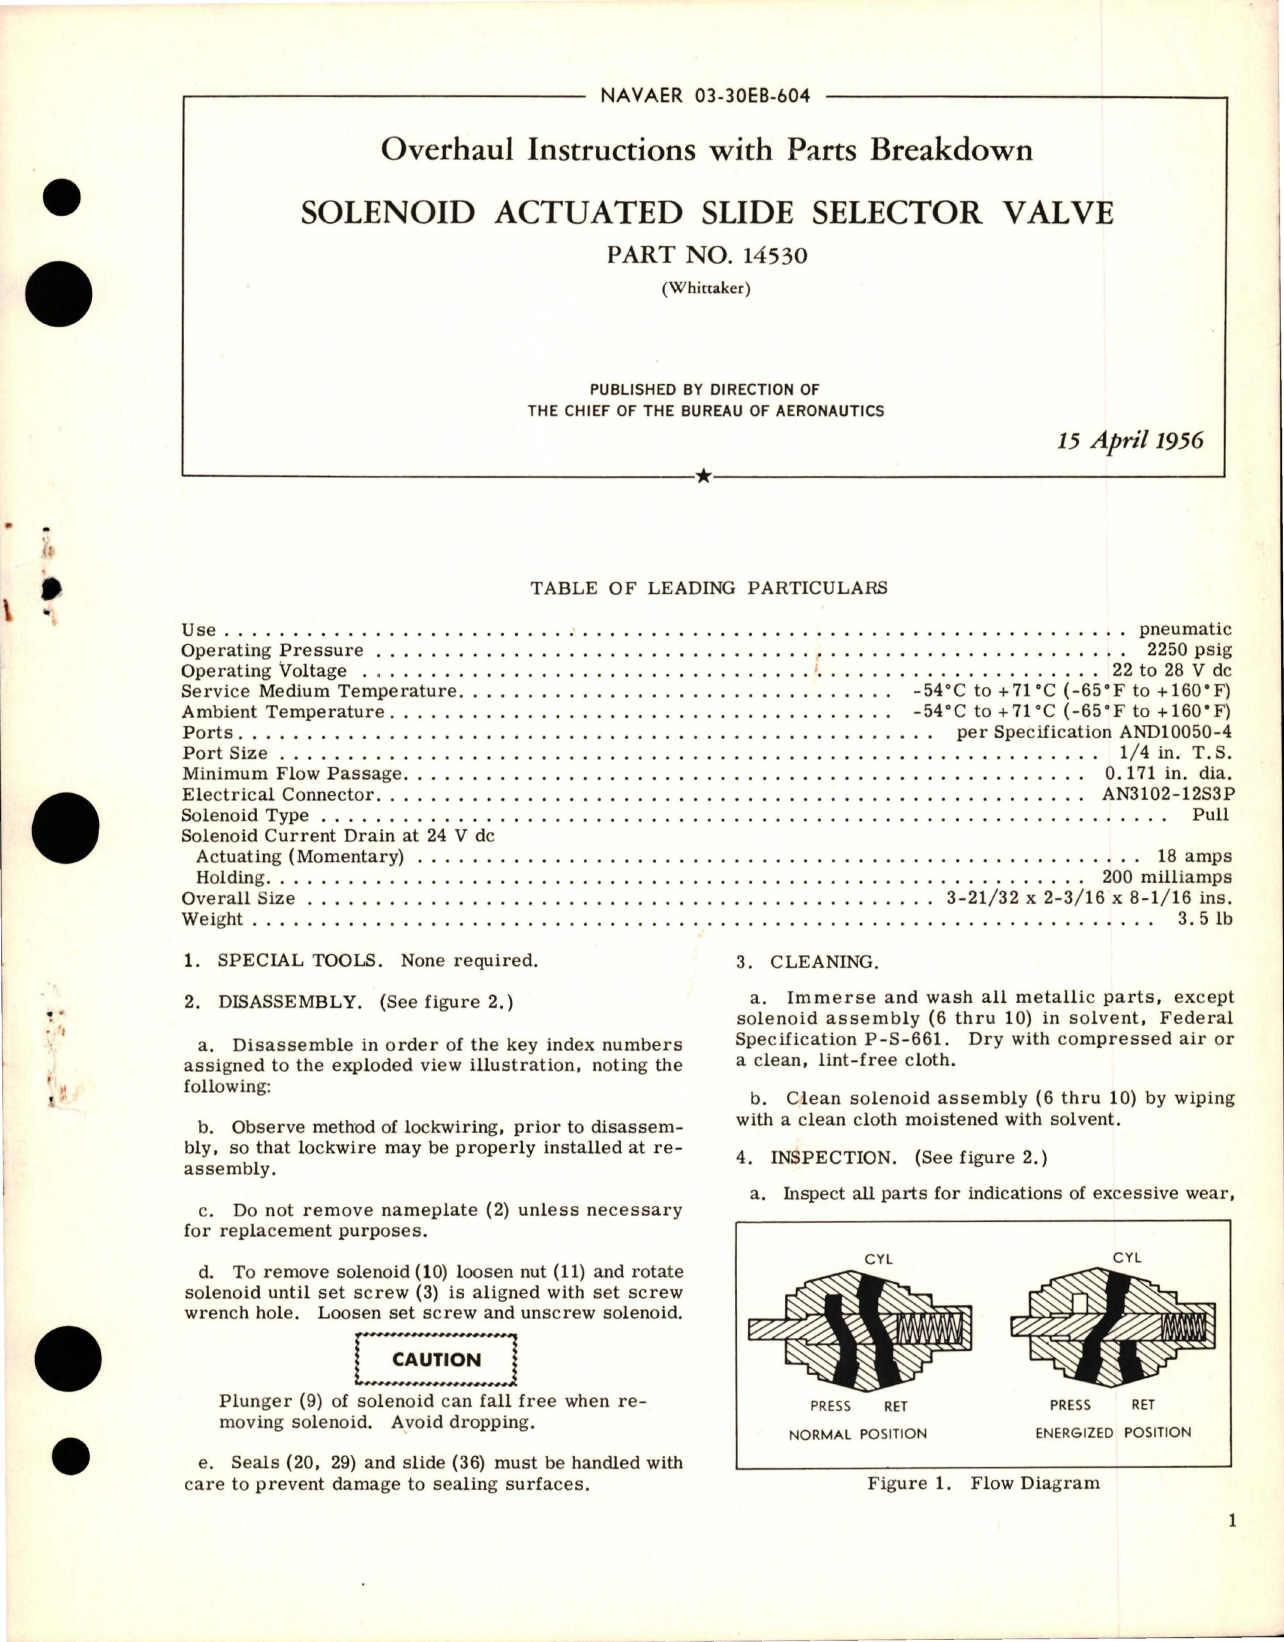 Sample page 1 from AirCorps Library document: Overhaul Instructions with Parts for Solenoid Actuated Slide Selector Valve - Part 14530